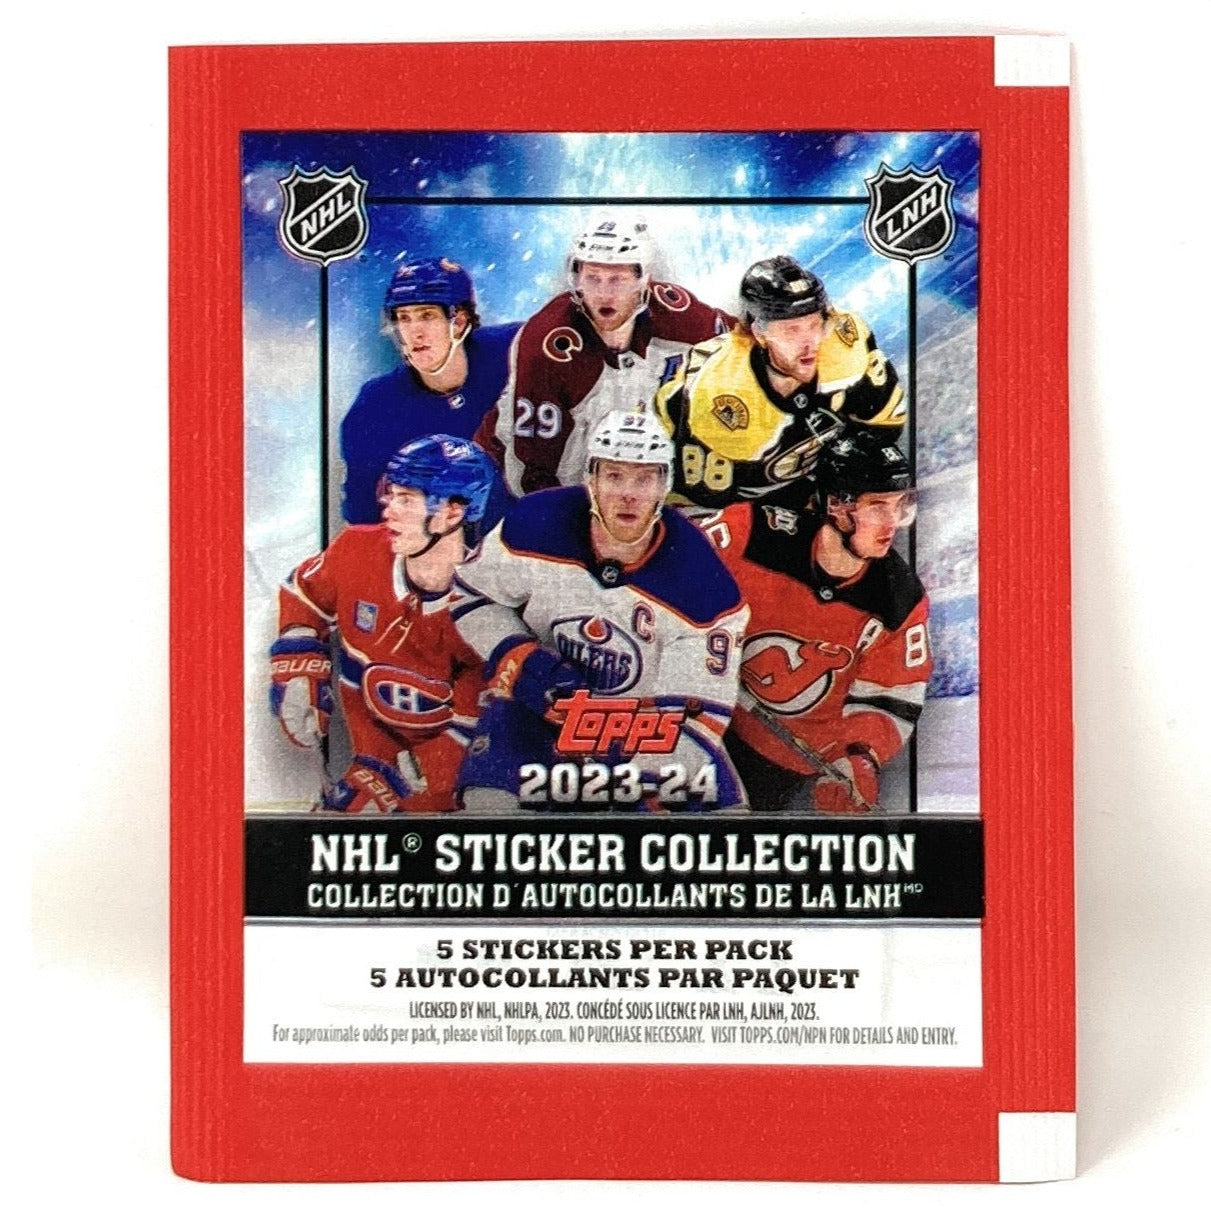 2023-24 Topps NHL Hockey Sticker Collection Pack 887521121625 - King Card Canada